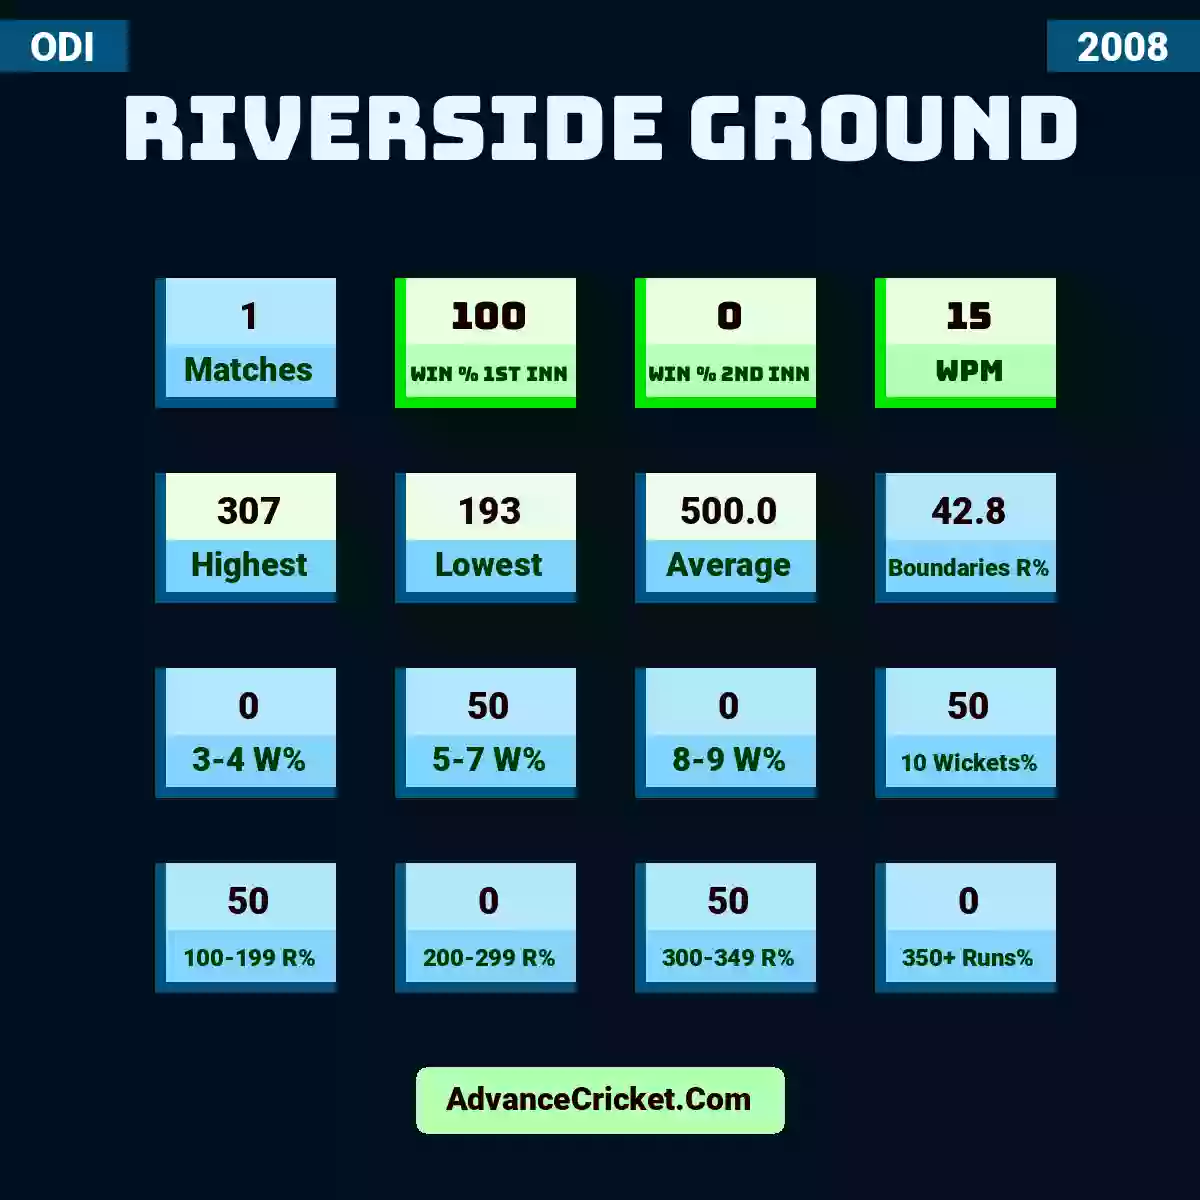 Image showing Riverside Ground with Matches: 1, Win % 1st Inn: 100, Win % 2nd Inn: 0, WPM: 15, Highest: 307, Lowest: 193, Average: 500.0, Boundaries R%: 42.8, 3-4 W%: 0, 5-7 W%: 50, 8-9 W%: 0, 10 Wickets%: 50, 100-199 R%: 50, 200-299 R%: 0, 300-349 R%: 50, 350+ Runs%: 0.